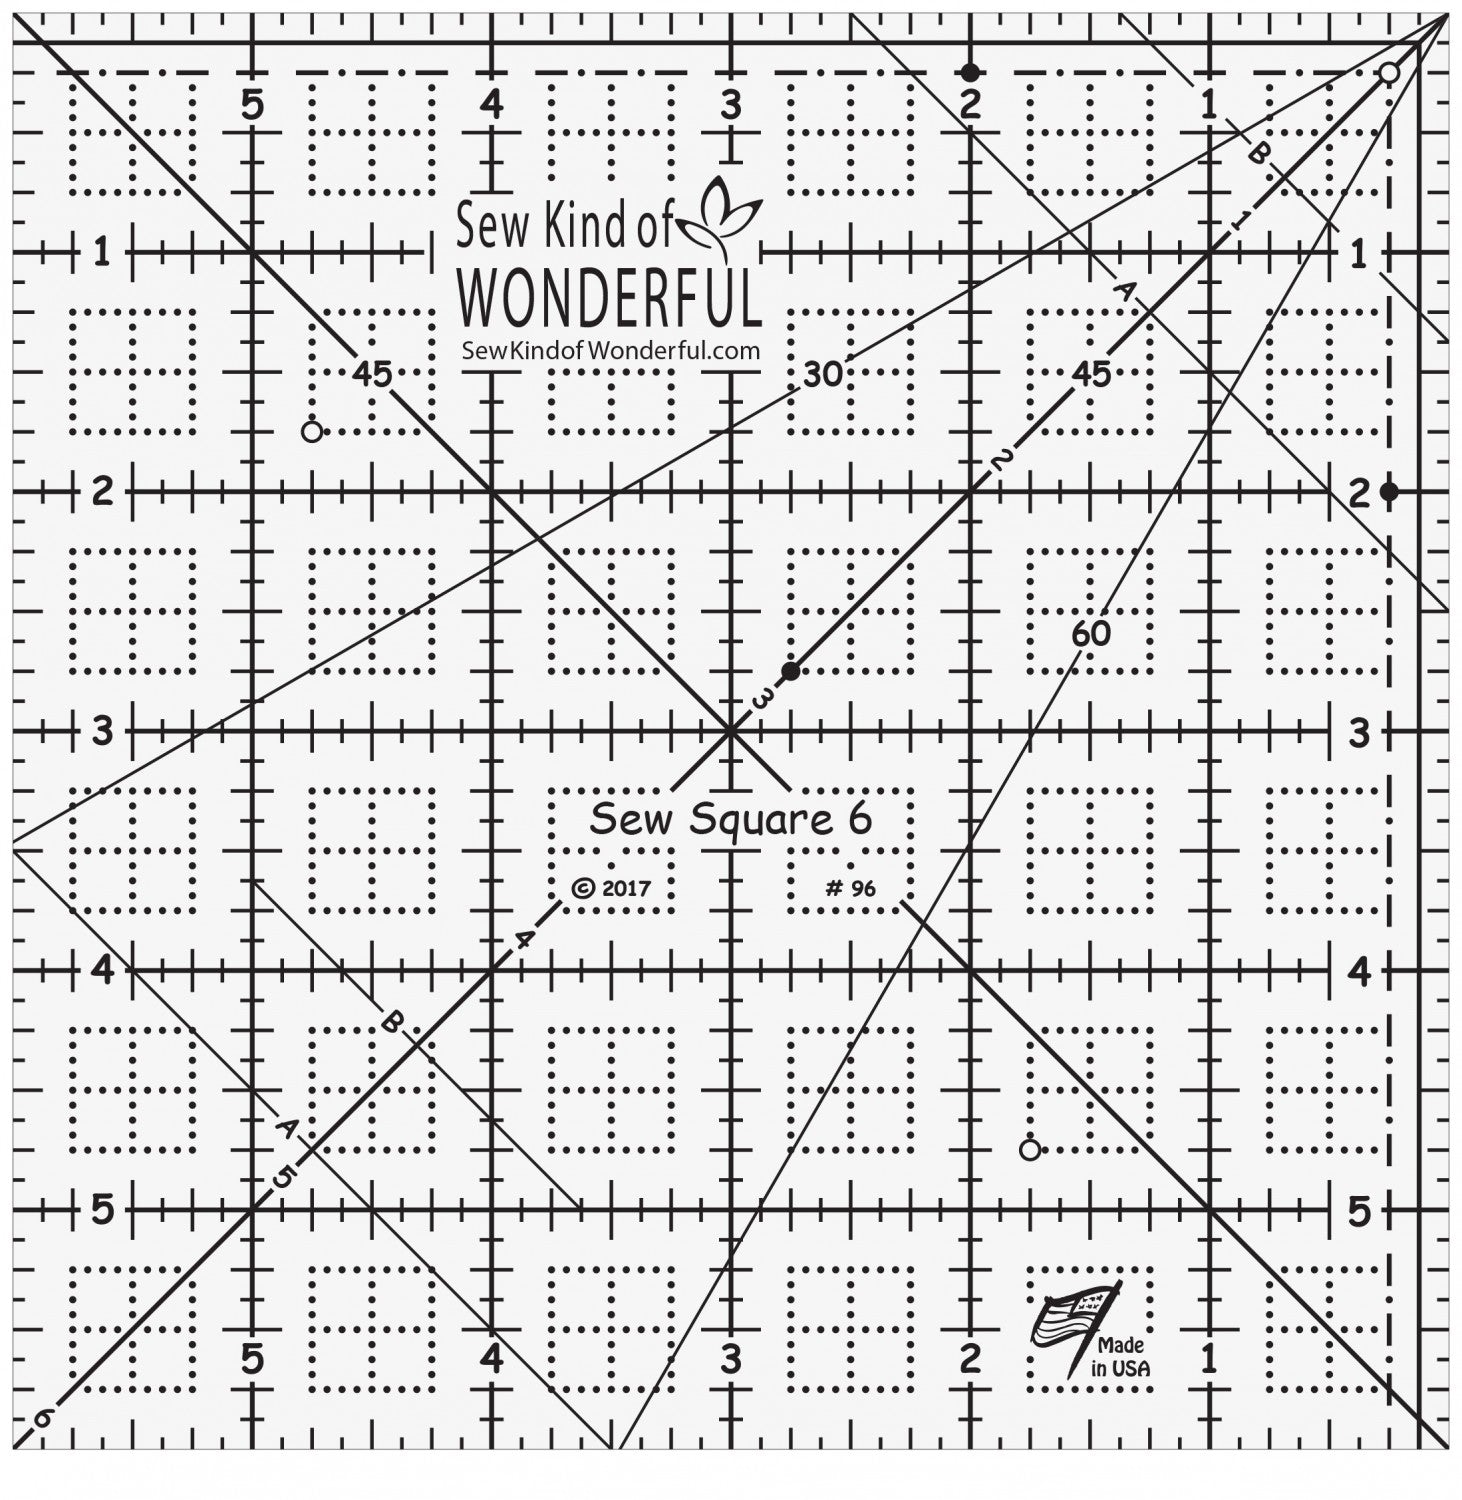 Sew Square 6 Quilt Ruler by Jenny Pedigo for Sew Kind of Wonderful